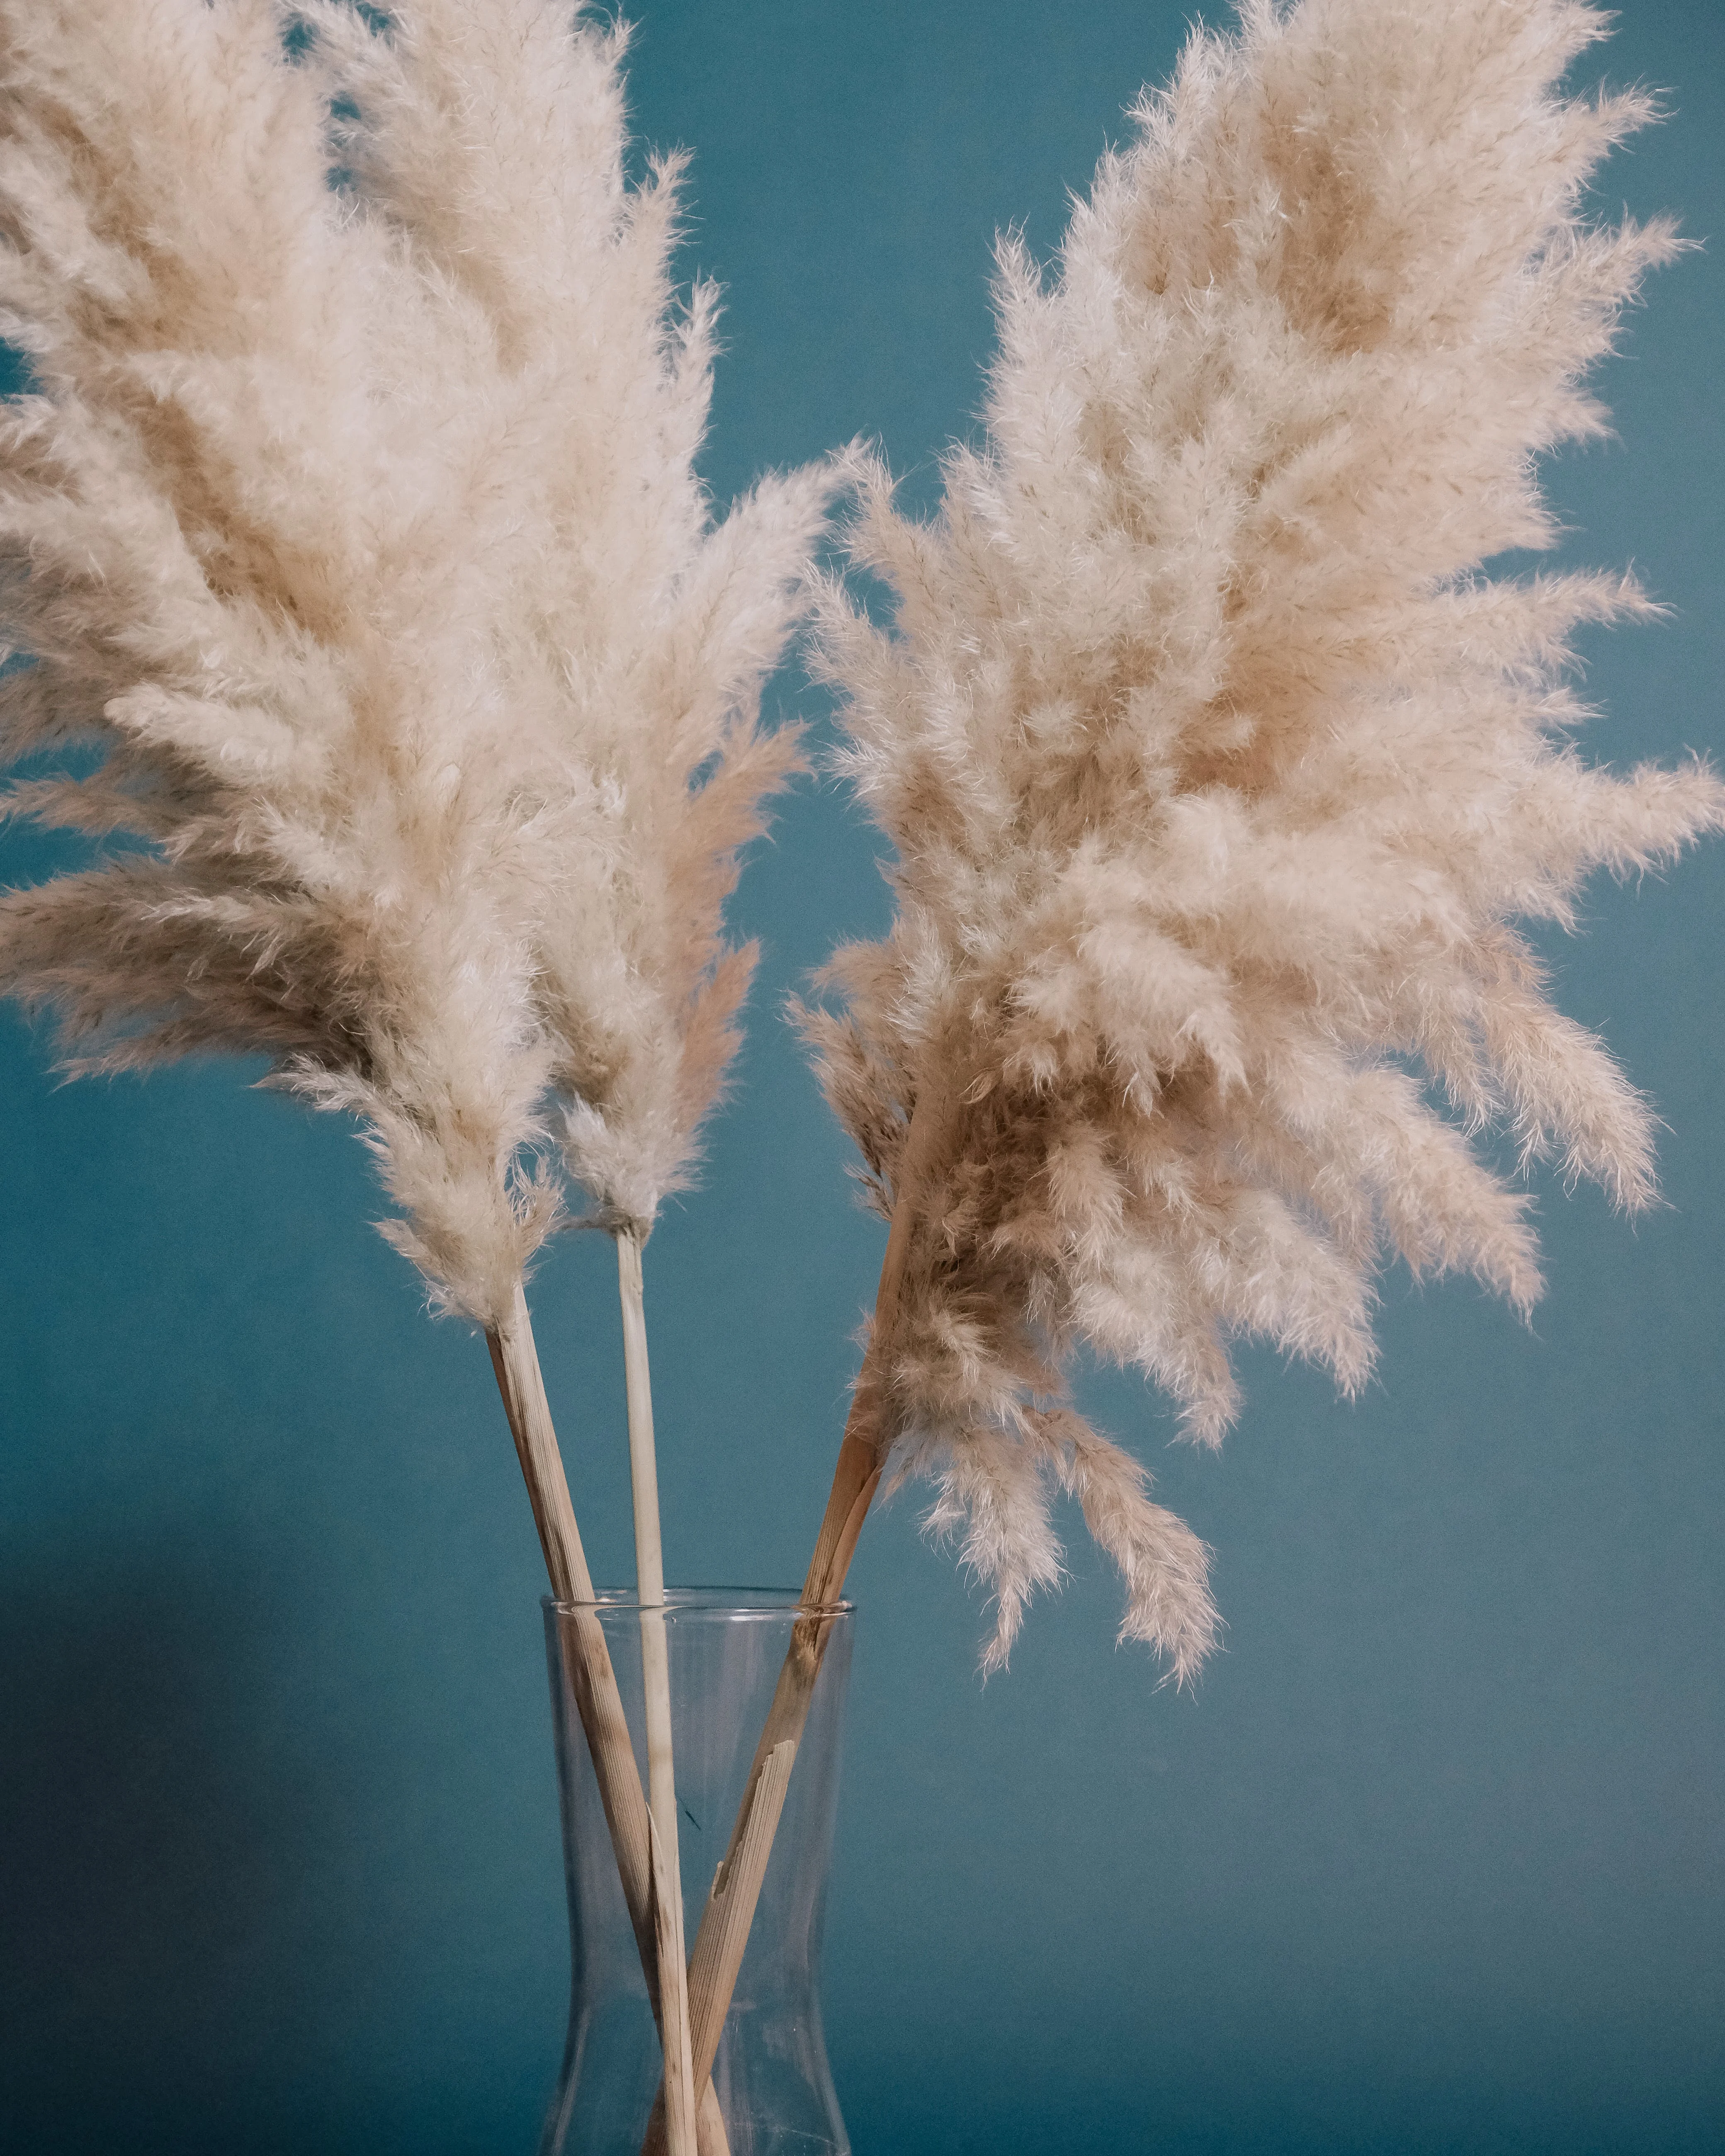 Free Cortaderia selloana plants with fluffy inflorescence plumes and thin stems placed in transparent glass vase on blue background Stock Photo